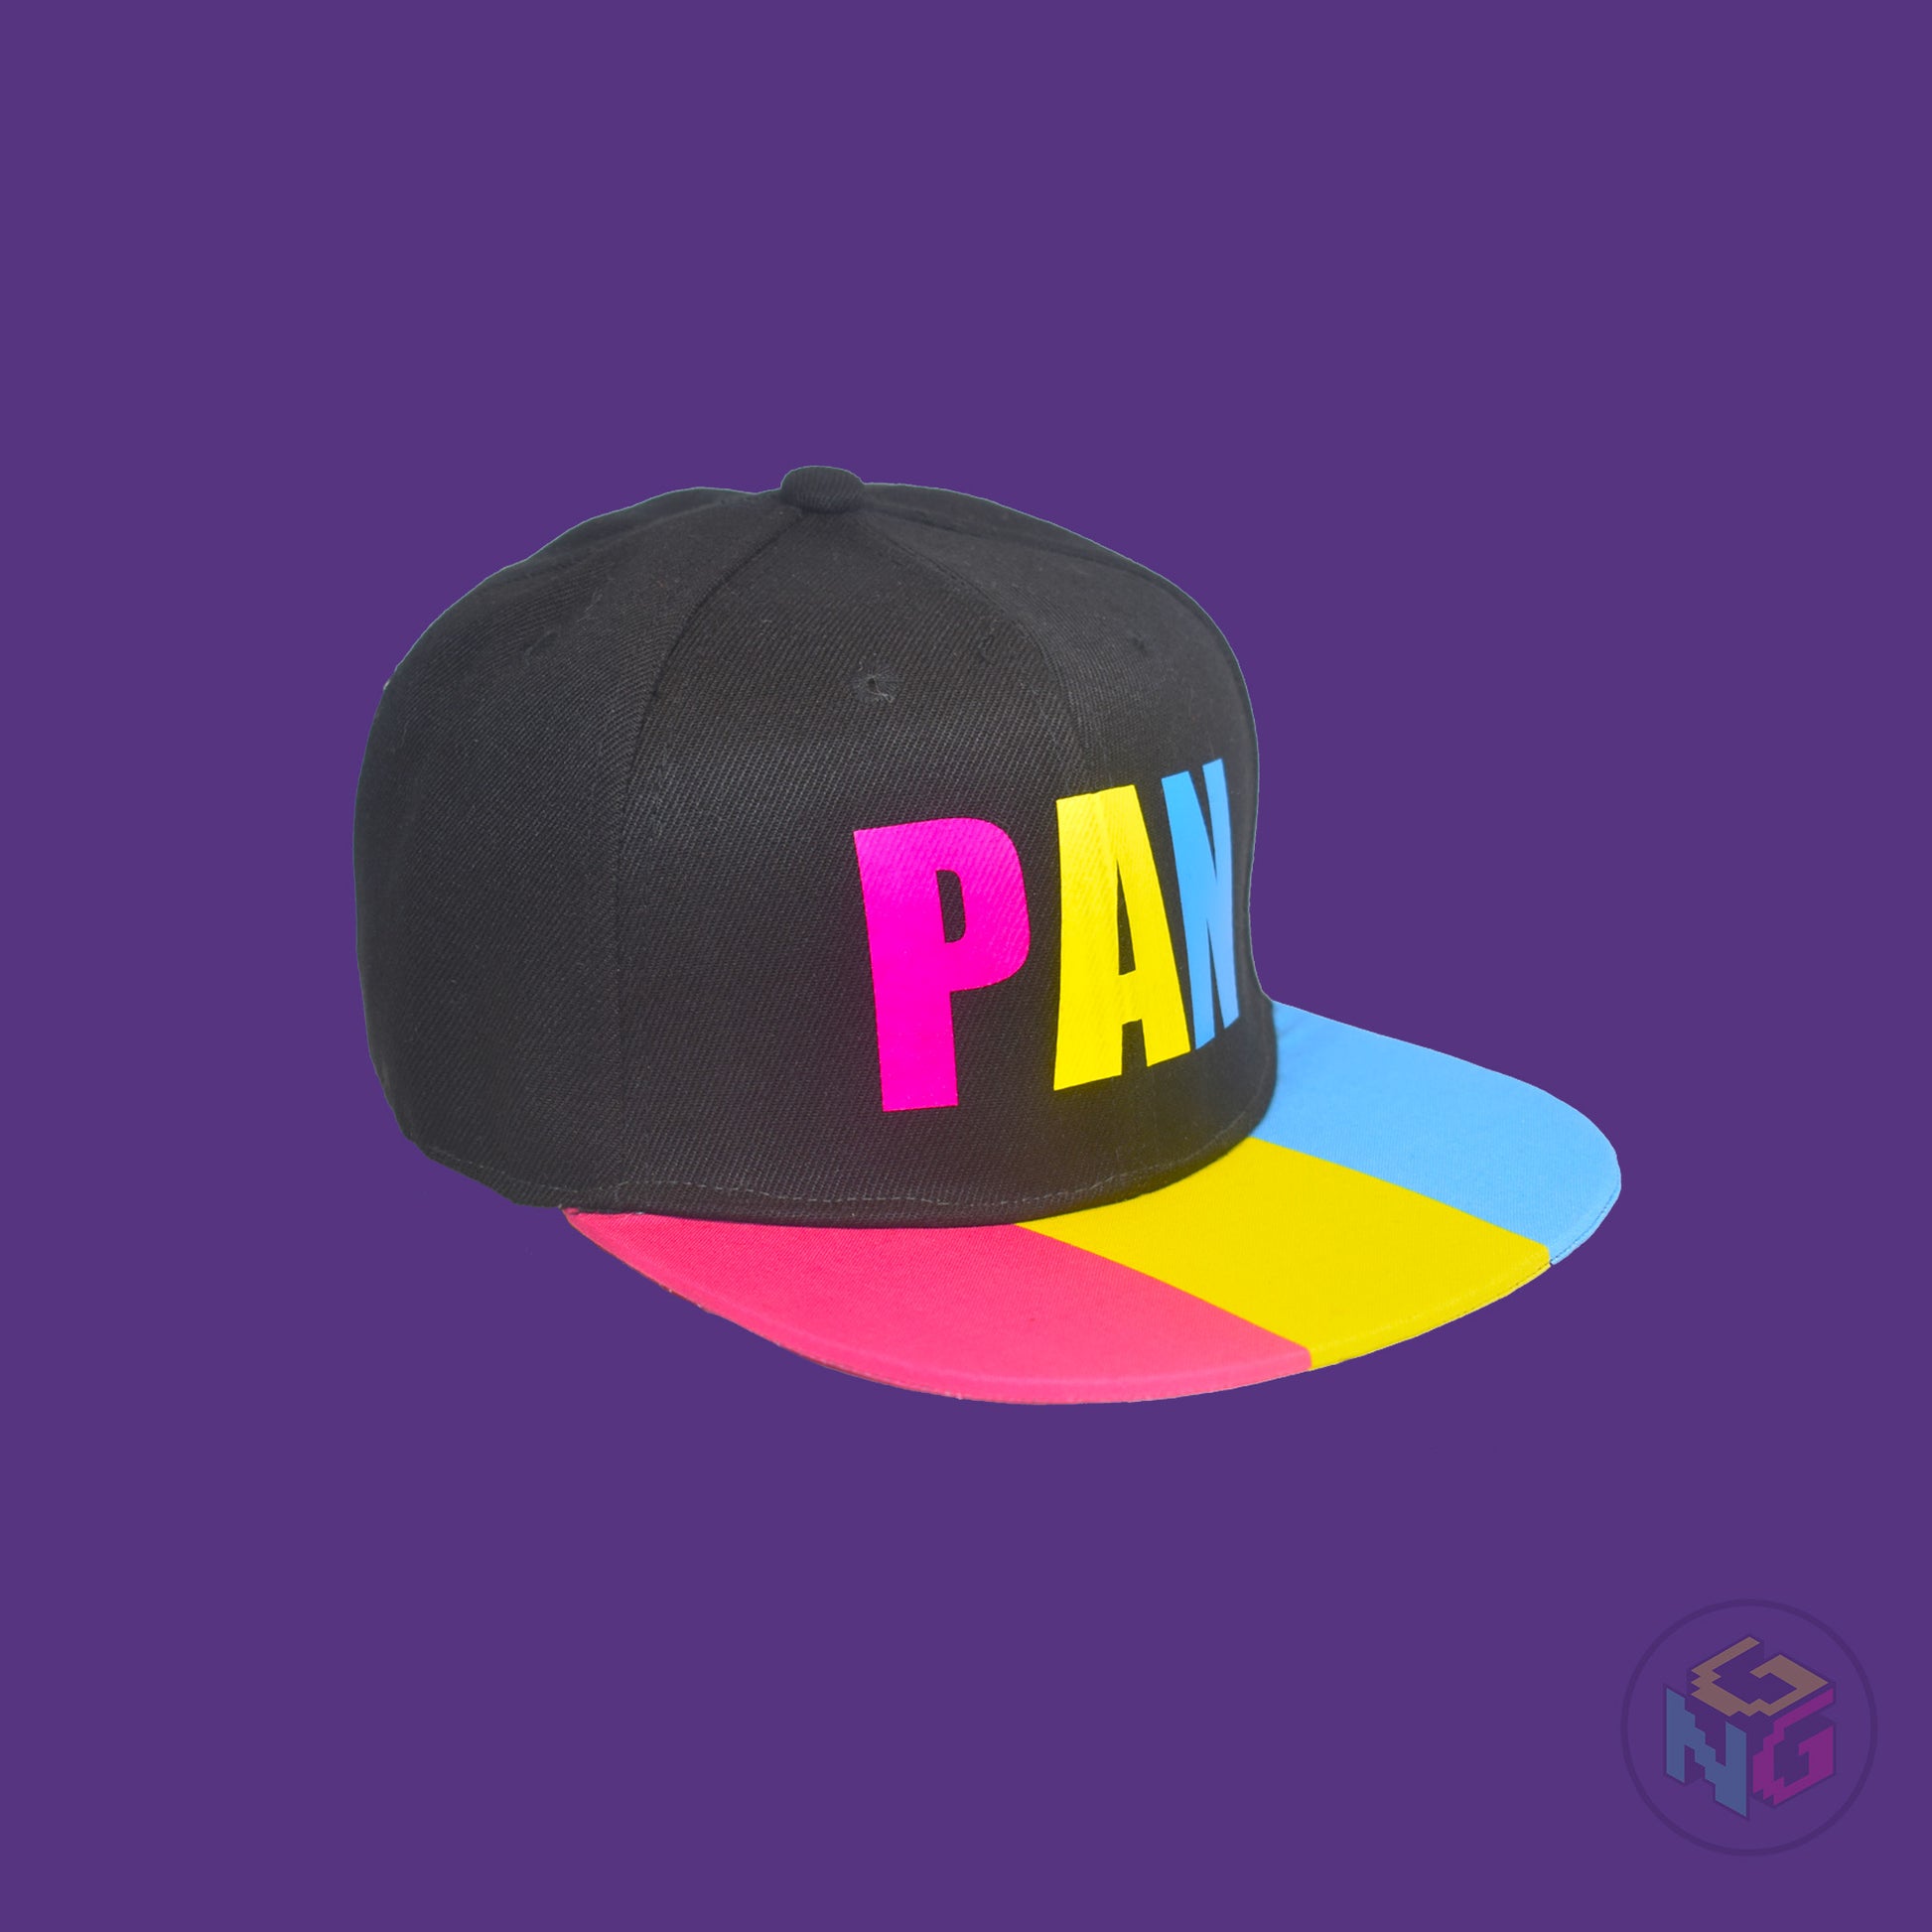 Black flat bill snapback hat. The brim has the pansexual pride flag on both sides and the front of the hat has the word “PAN” in pink, yellow, and blue letters. Front right view